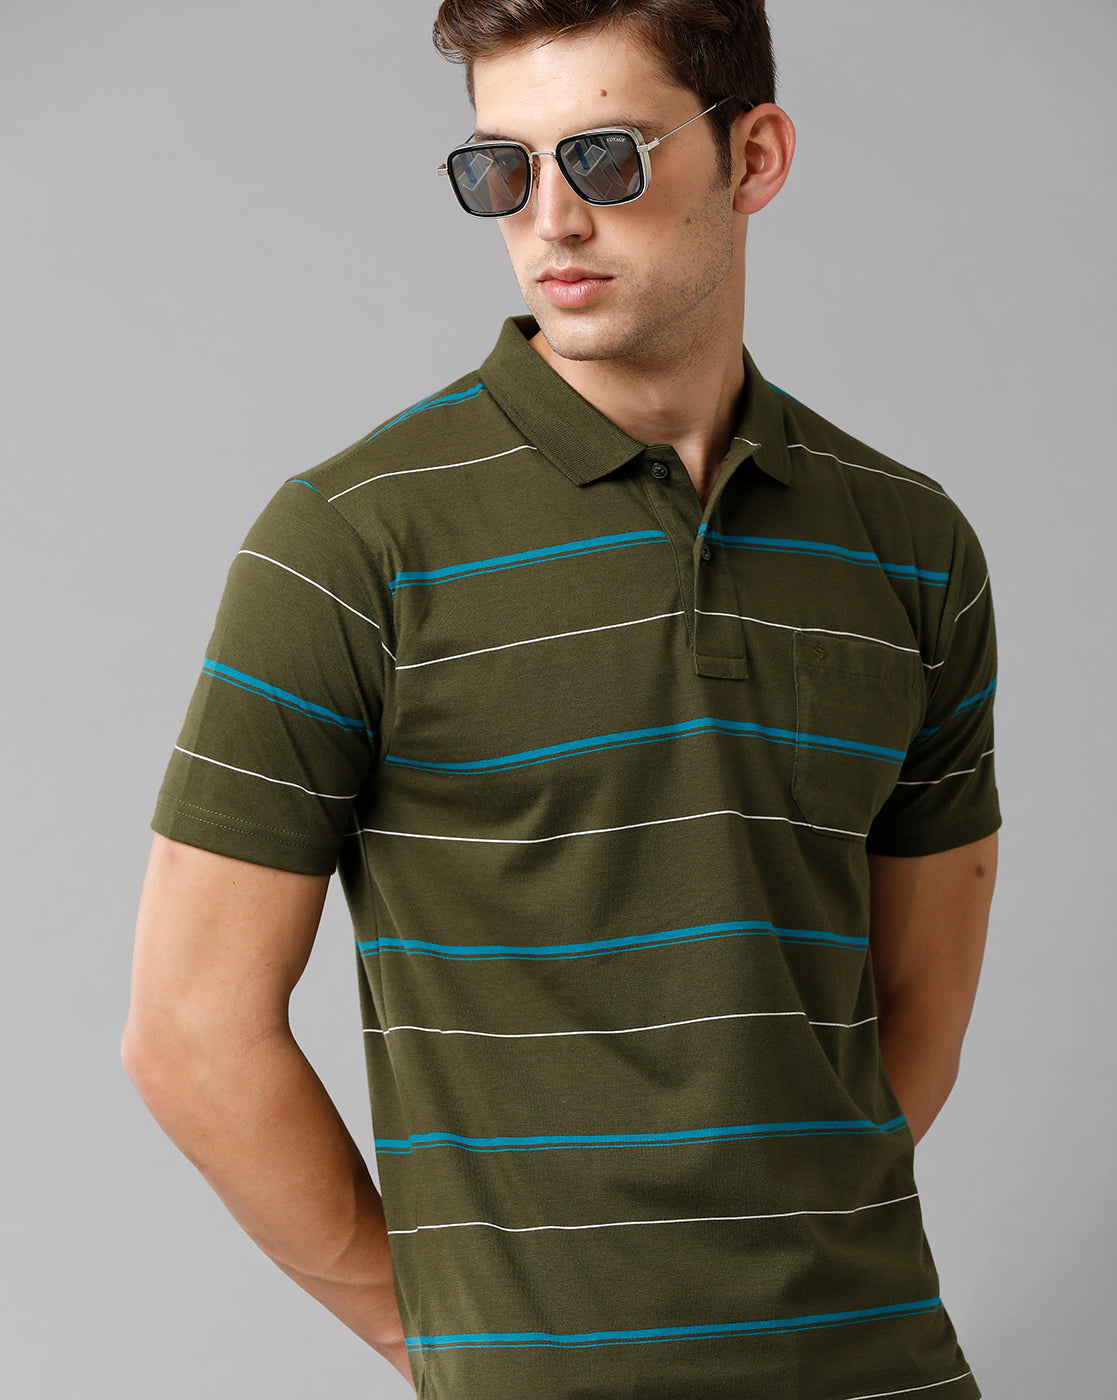 Classic Polo Mens Cotton Blend Striped Half Sleeve Authentic Fit Polo Neck Olive Color T-Shirt | Avon 500 B